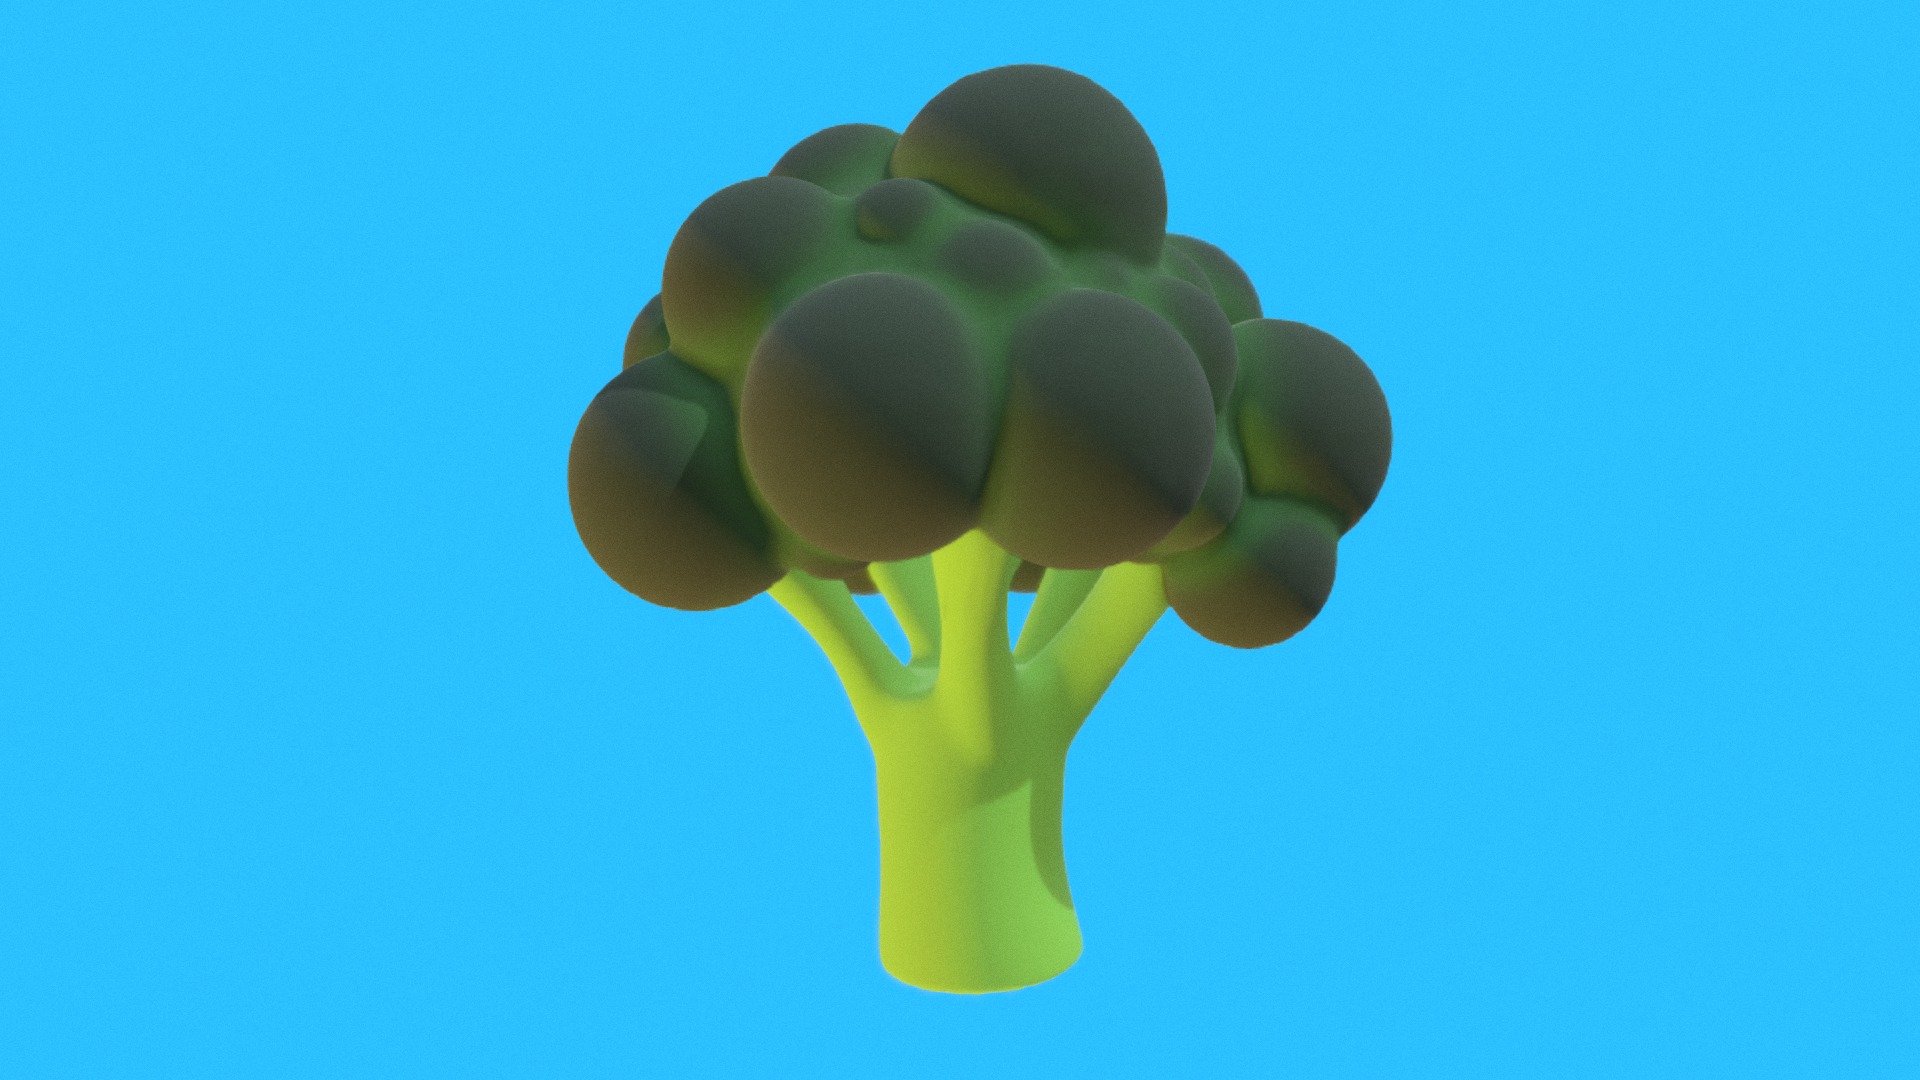 Broccoli is an edible green plant in the cabbage family whose large flowering head, stalk and small associated leaves are eaten as a vegetable. Broccoli is classified in the Italica cultivar group of the species Brassica oleracea - Toon Broccoli - Buy Royalty Free 3D model by CzernO (@czernobog) 3d model